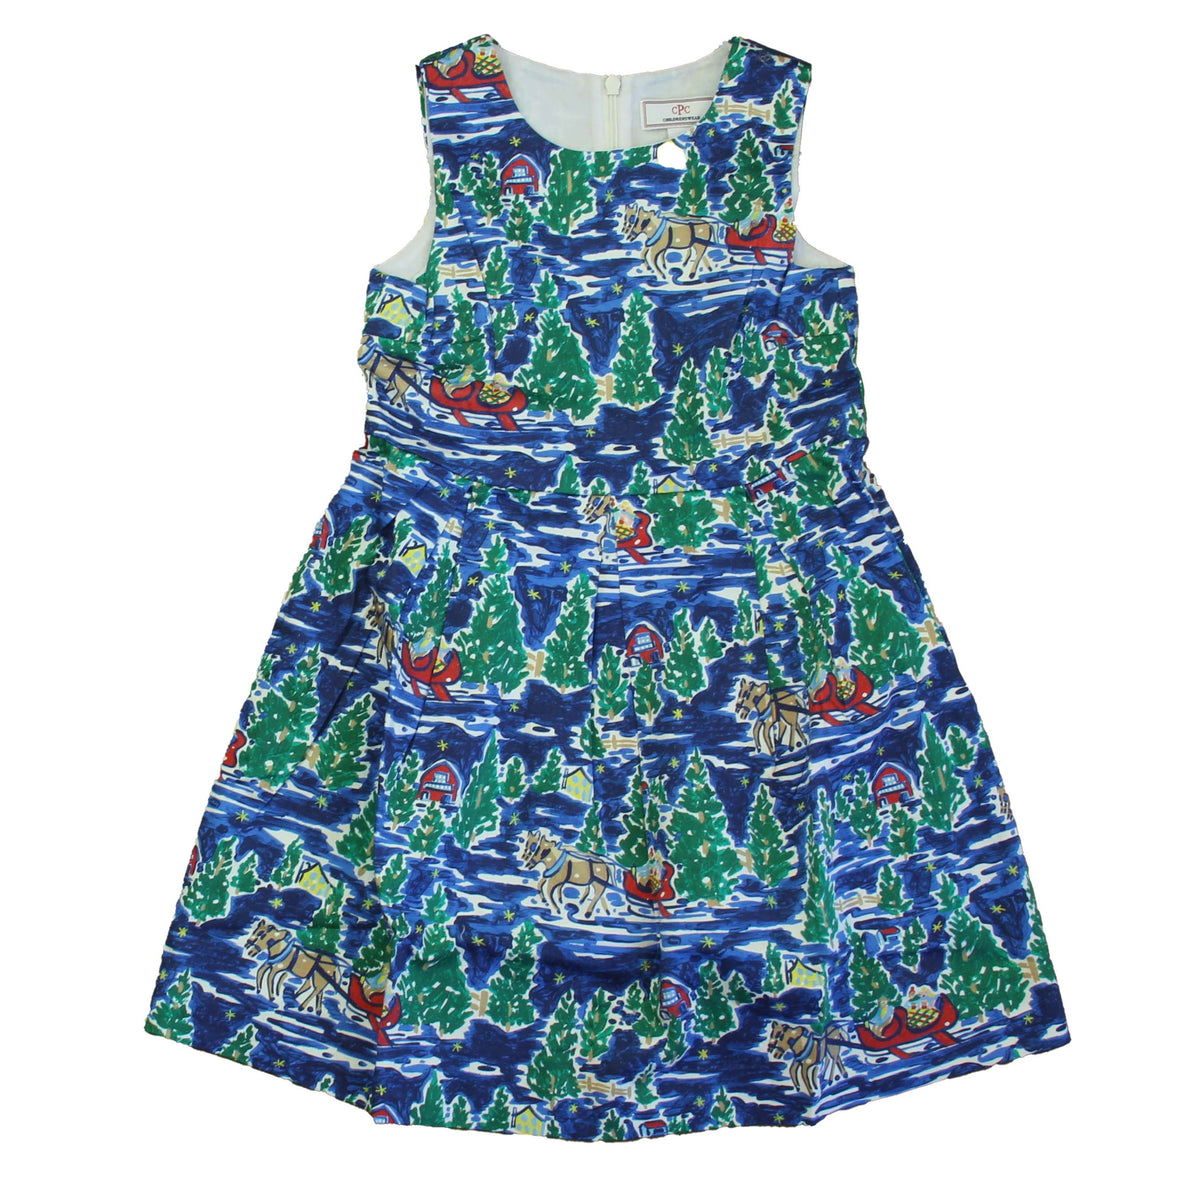 New with Tags: Aspen Sleigh Dress -- FINAL SALE